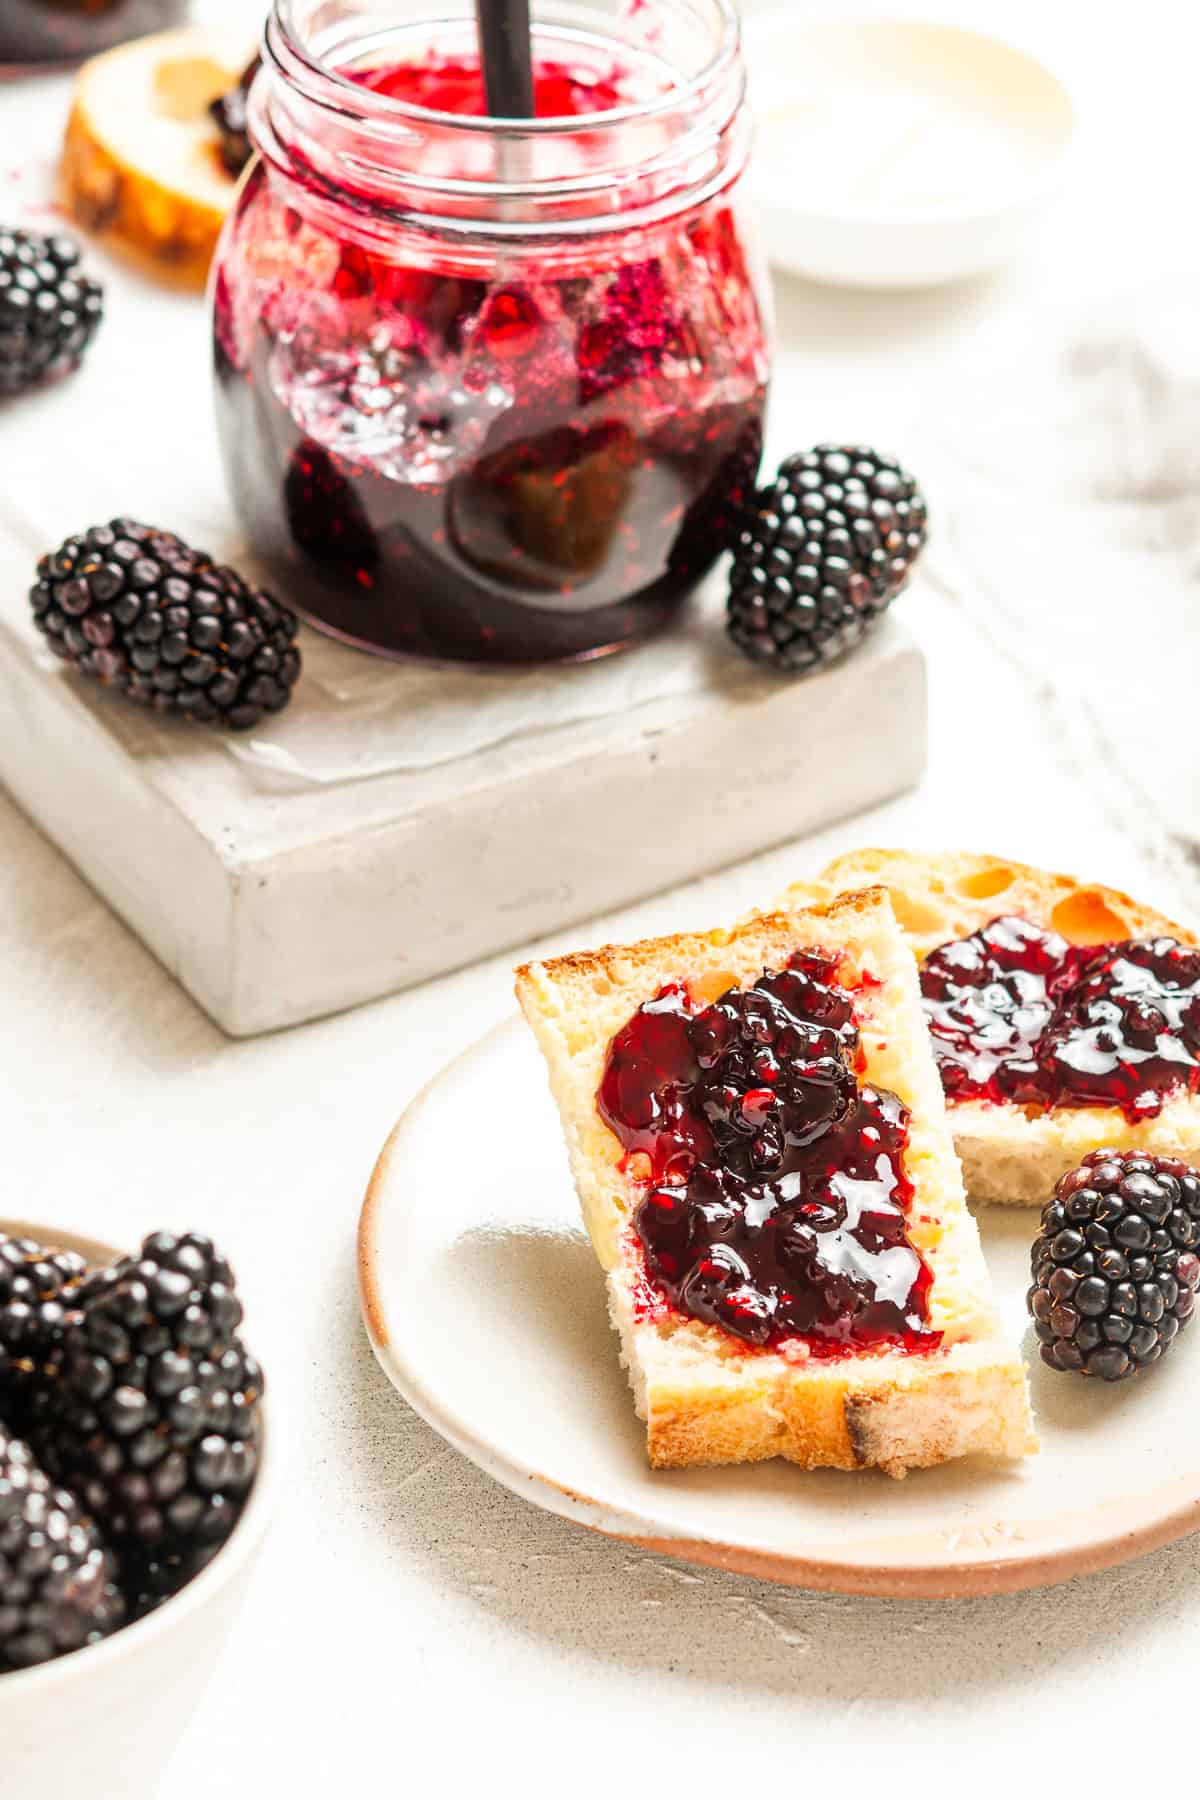 Plate with some toast topped with jam, and a jar of jam and some blackberries in the background.